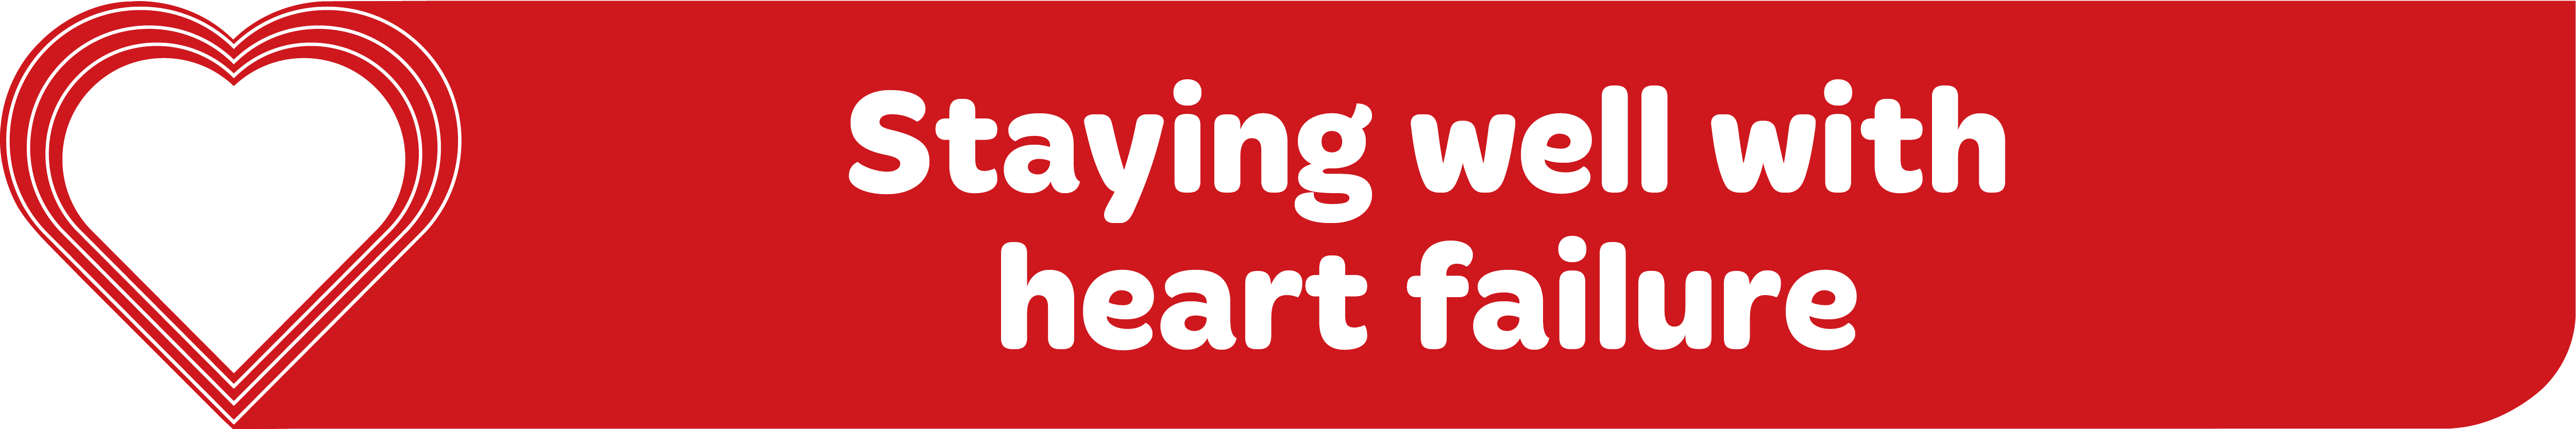 Staying well with heart failure